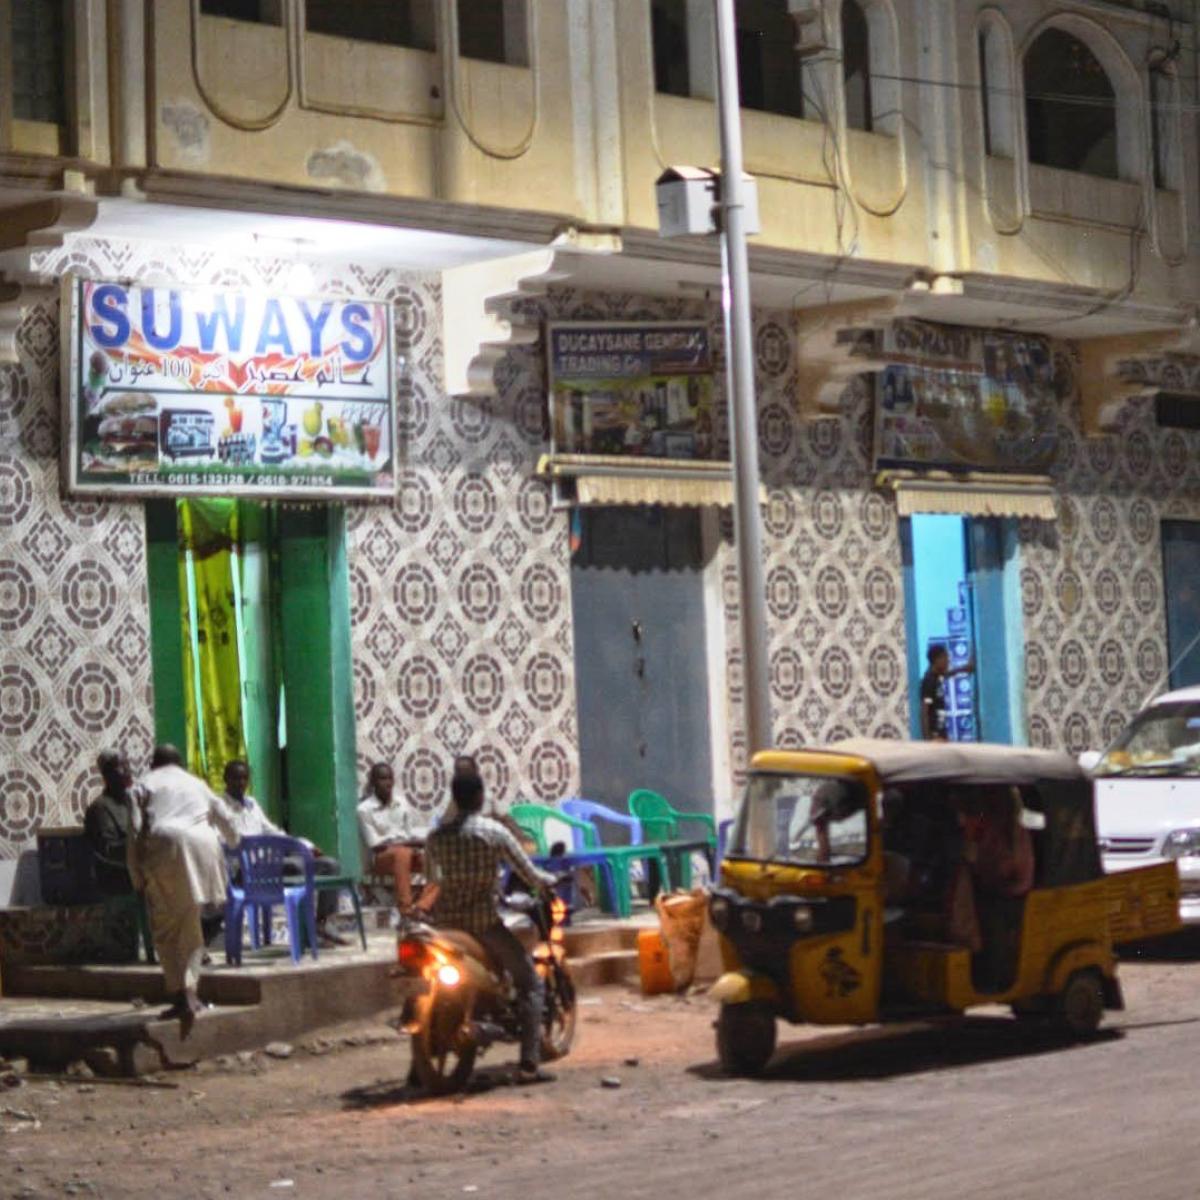 Solar Power Brings Light to the Streets in Somalia